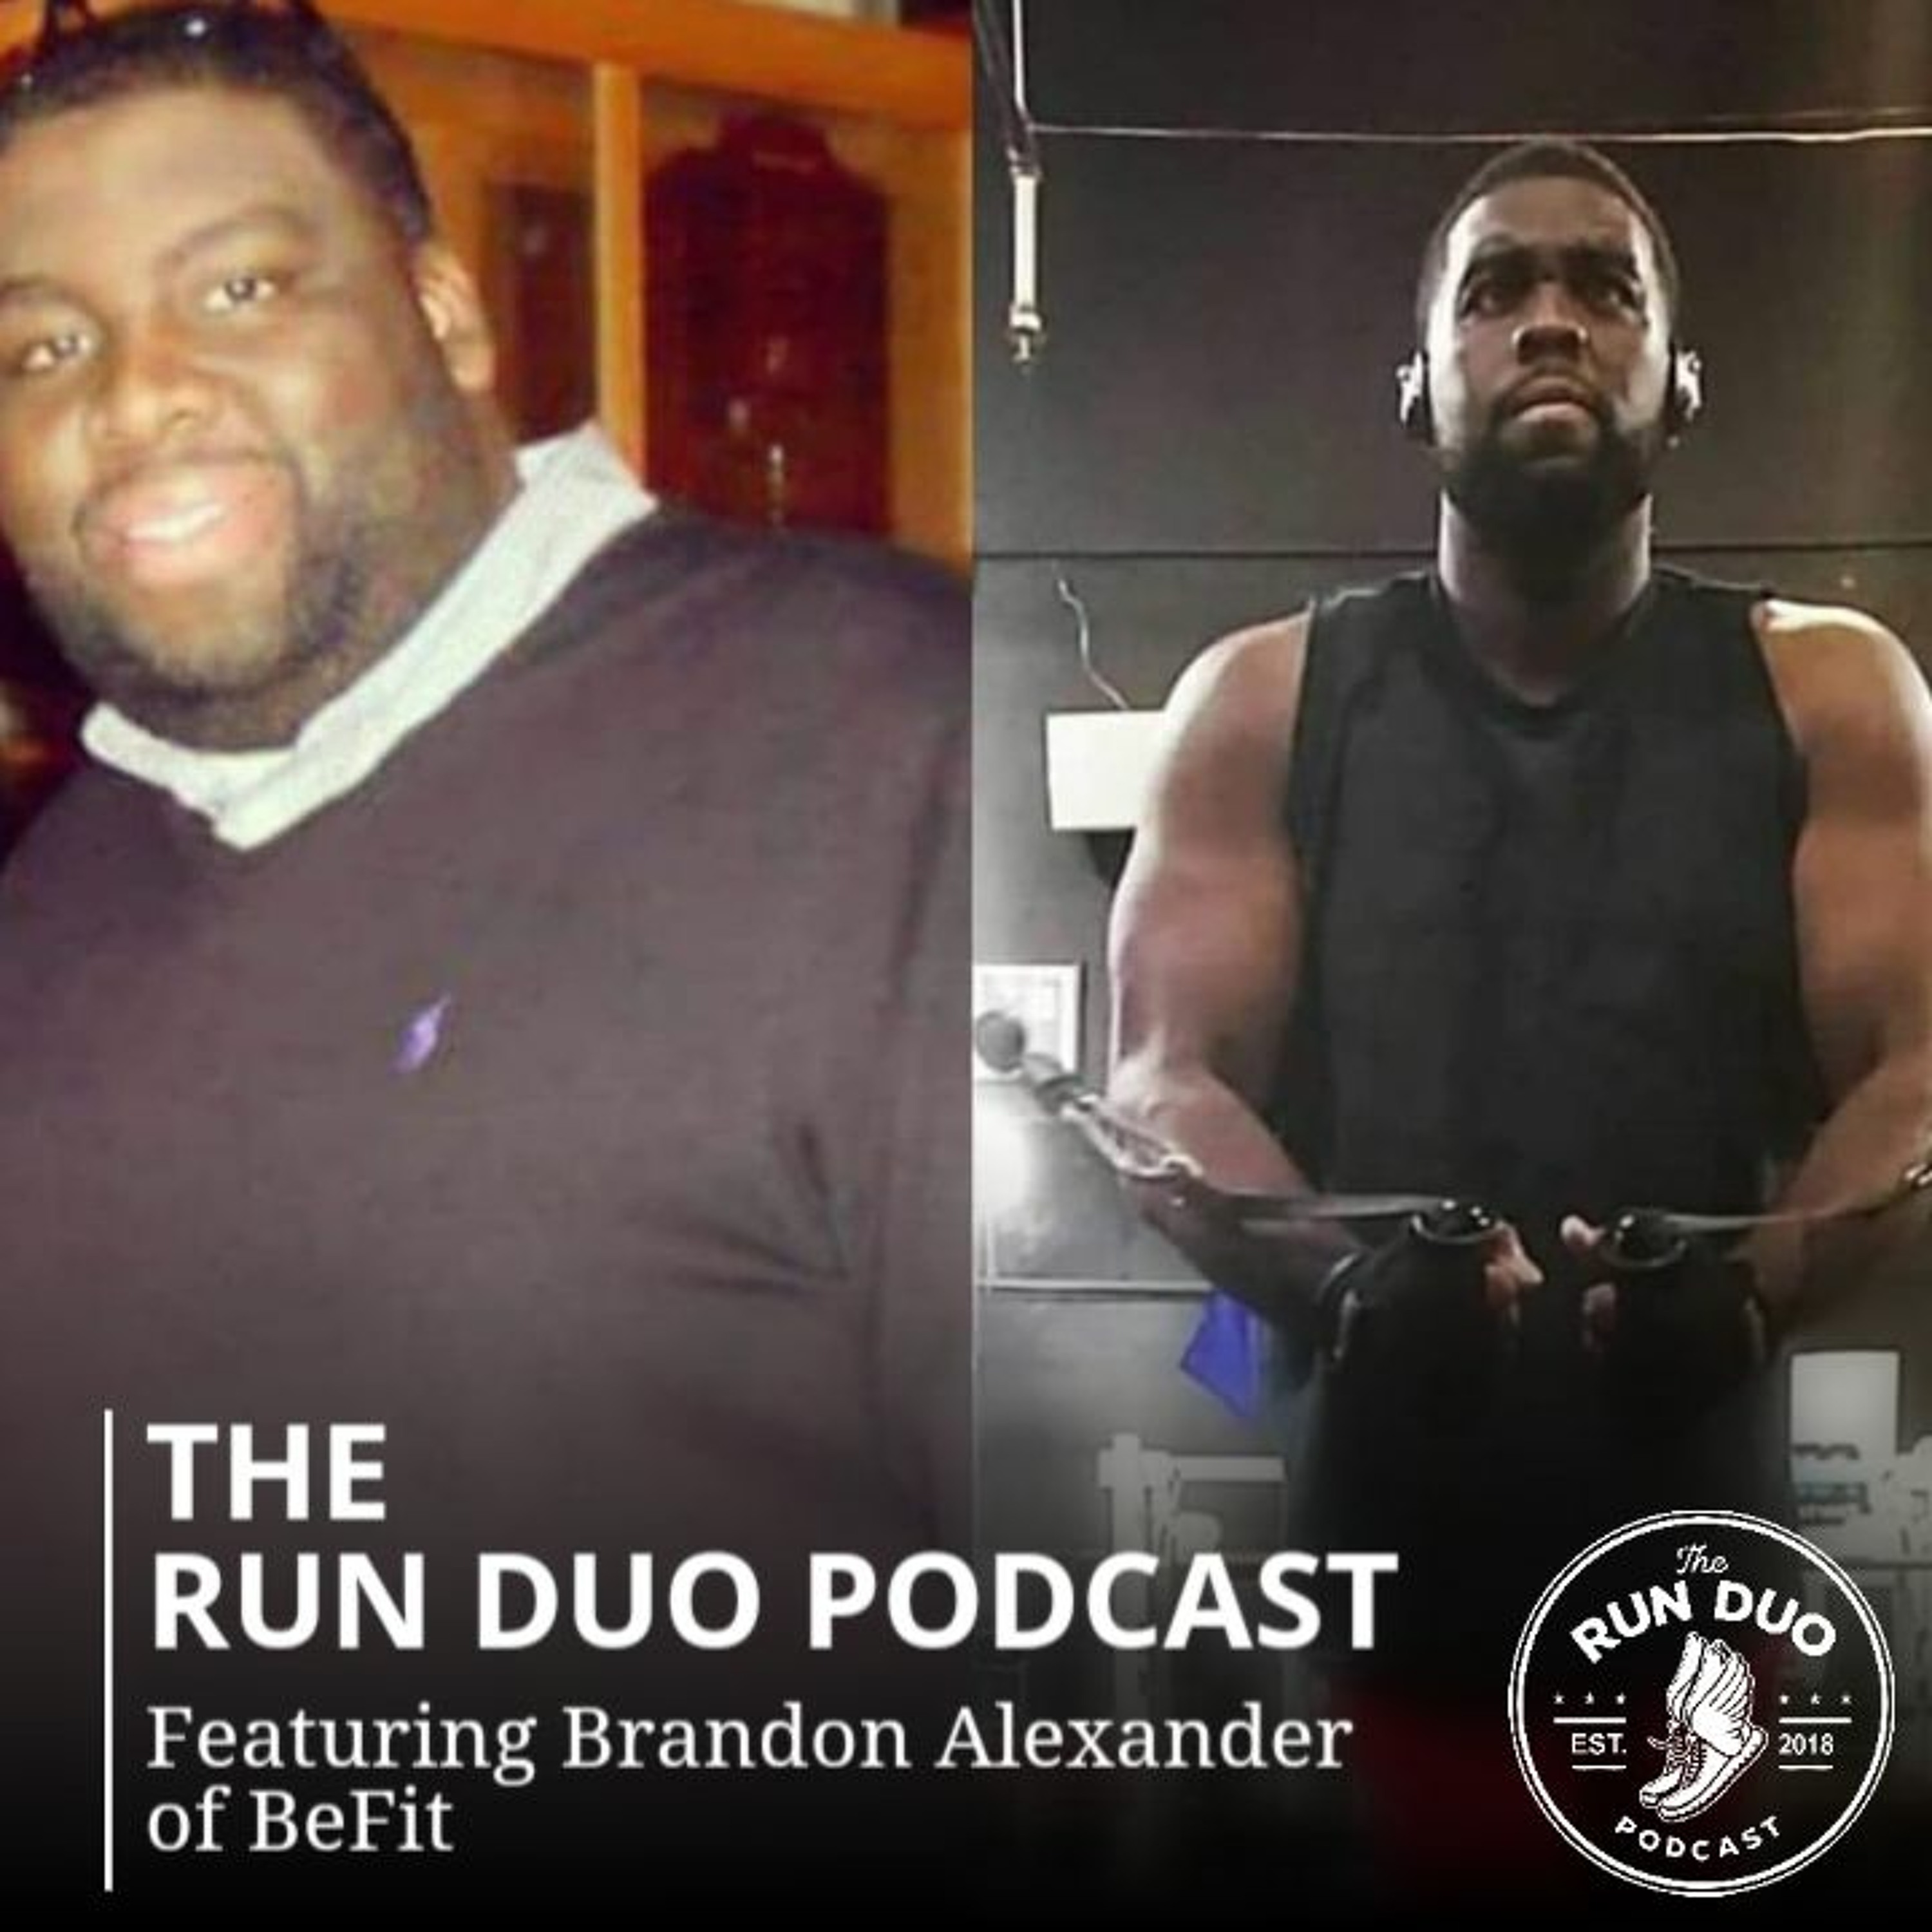 The DUO interview Brandon Alexander along with talk about Mary Cain and NOP